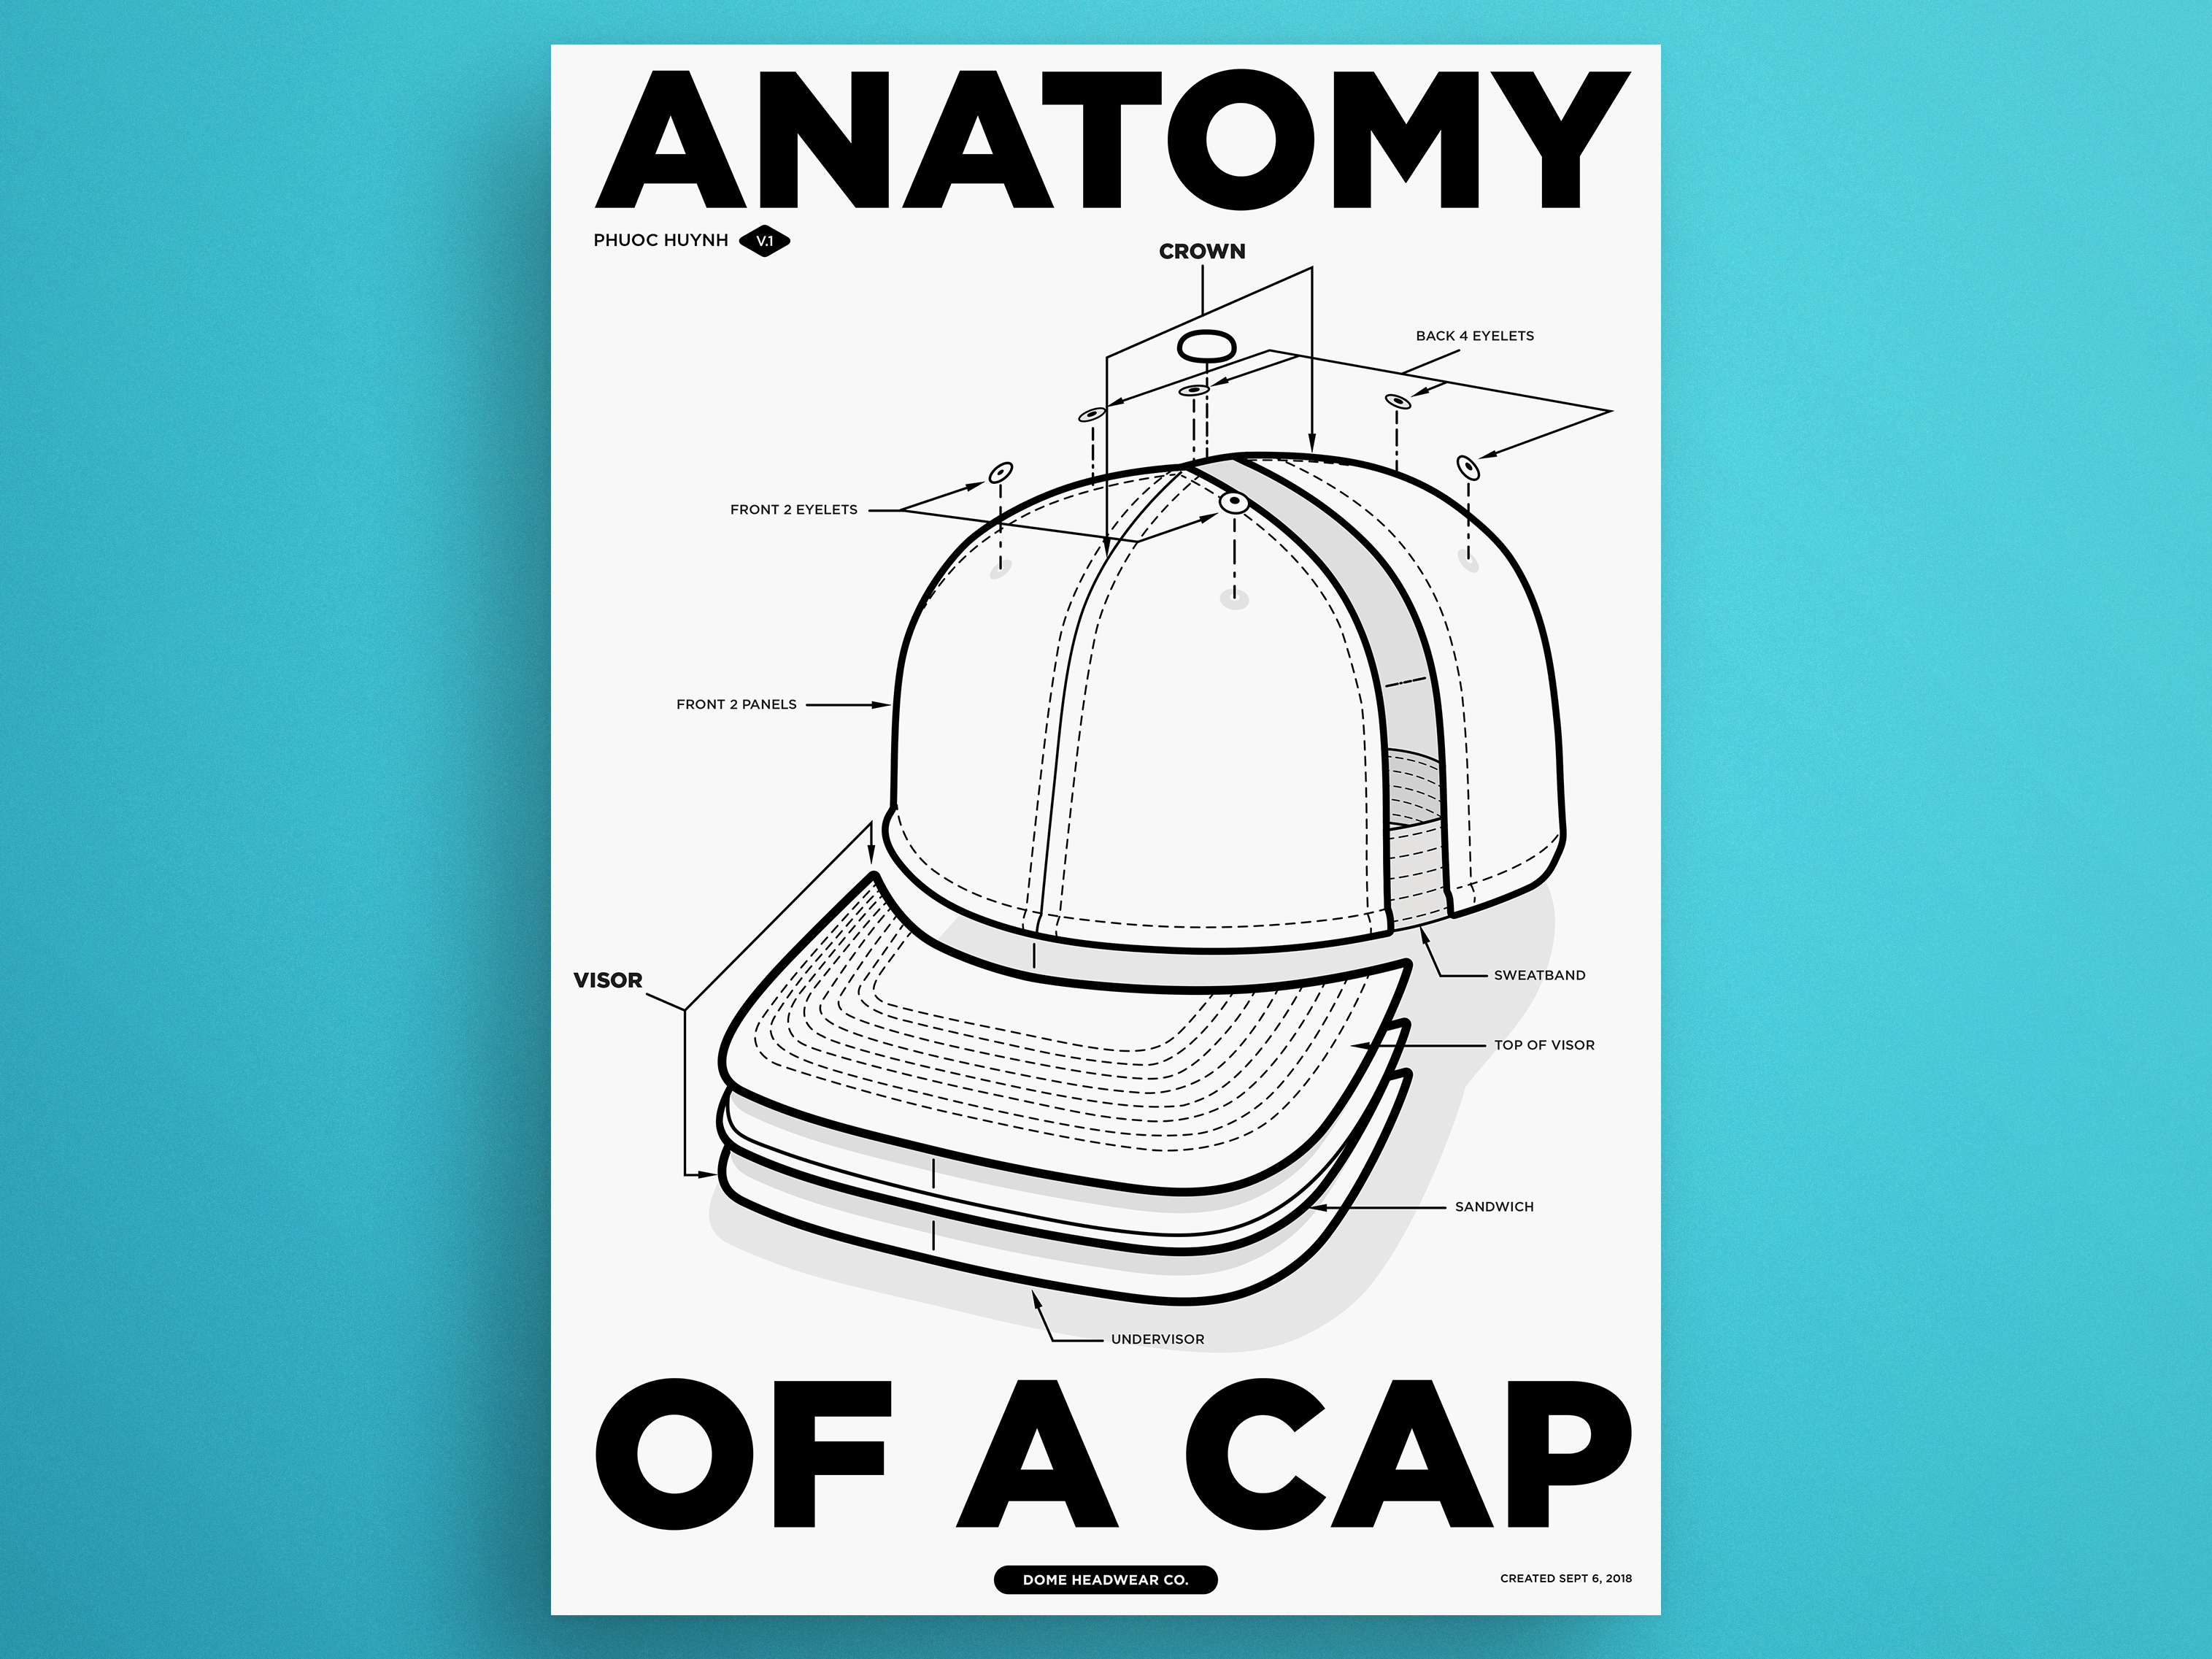 The Anatomy of a Cap